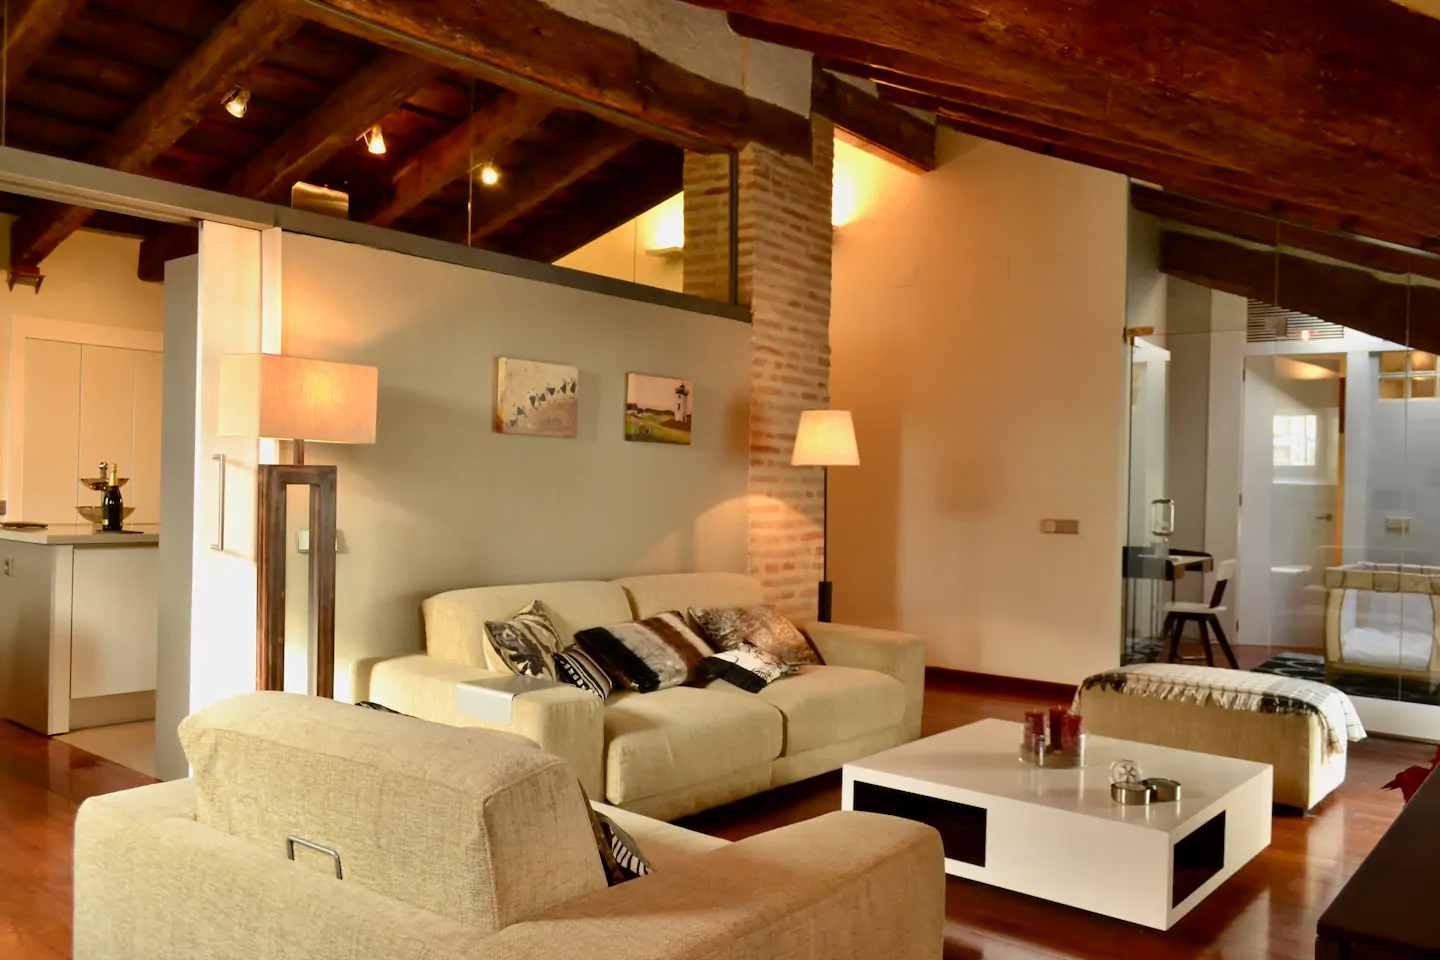 2 bedroom apartment in Valencia for expats